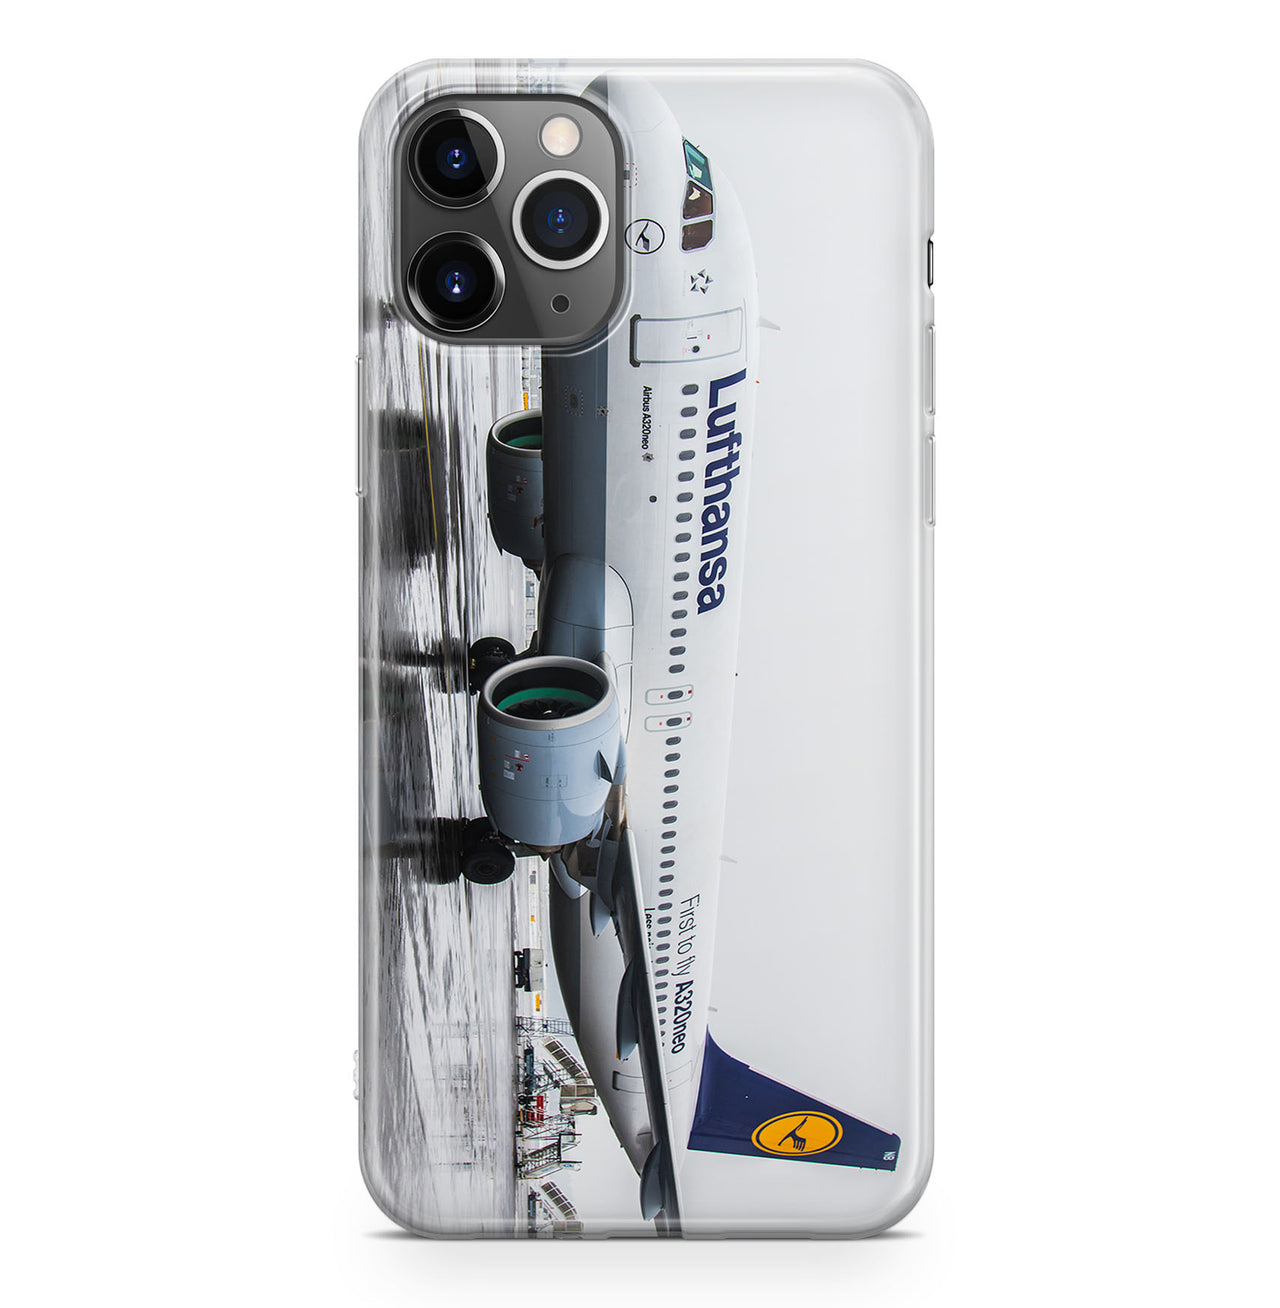 Lufthansa's A320 Neo Designed iPhone Cases